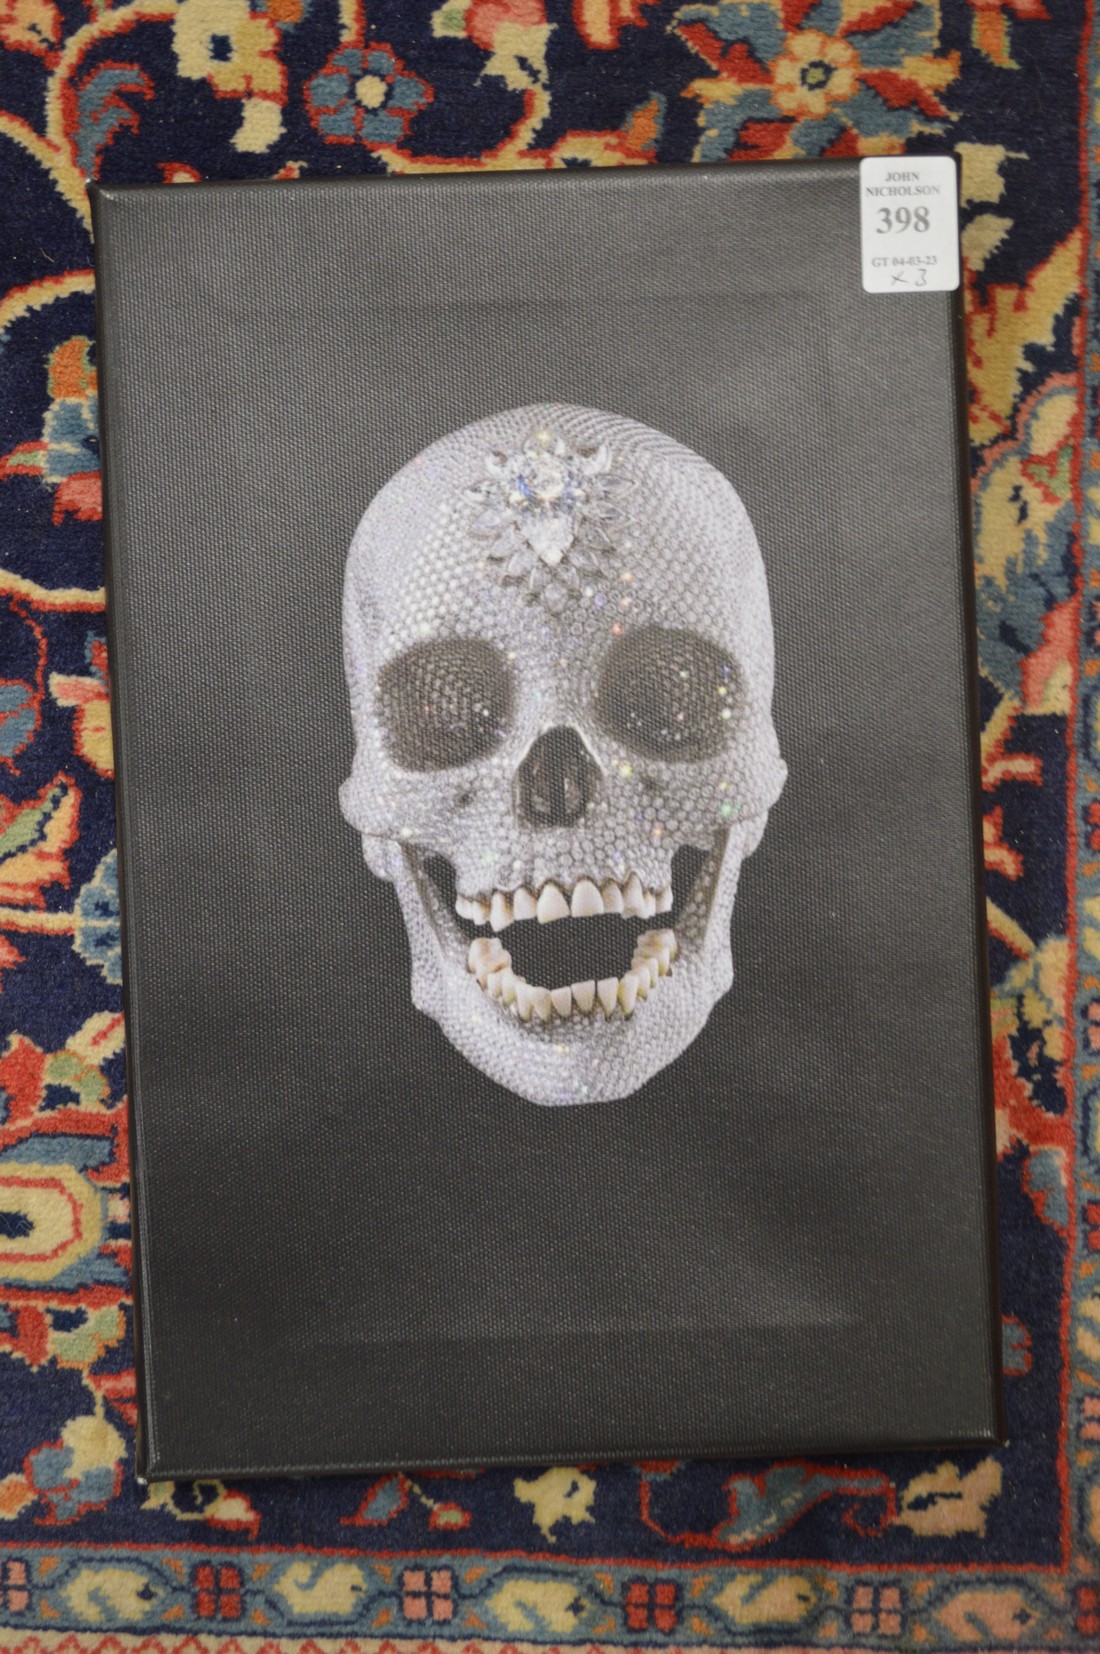 Three prints relating to Damien Hirst including the crystal skull. - Image 3 of 3